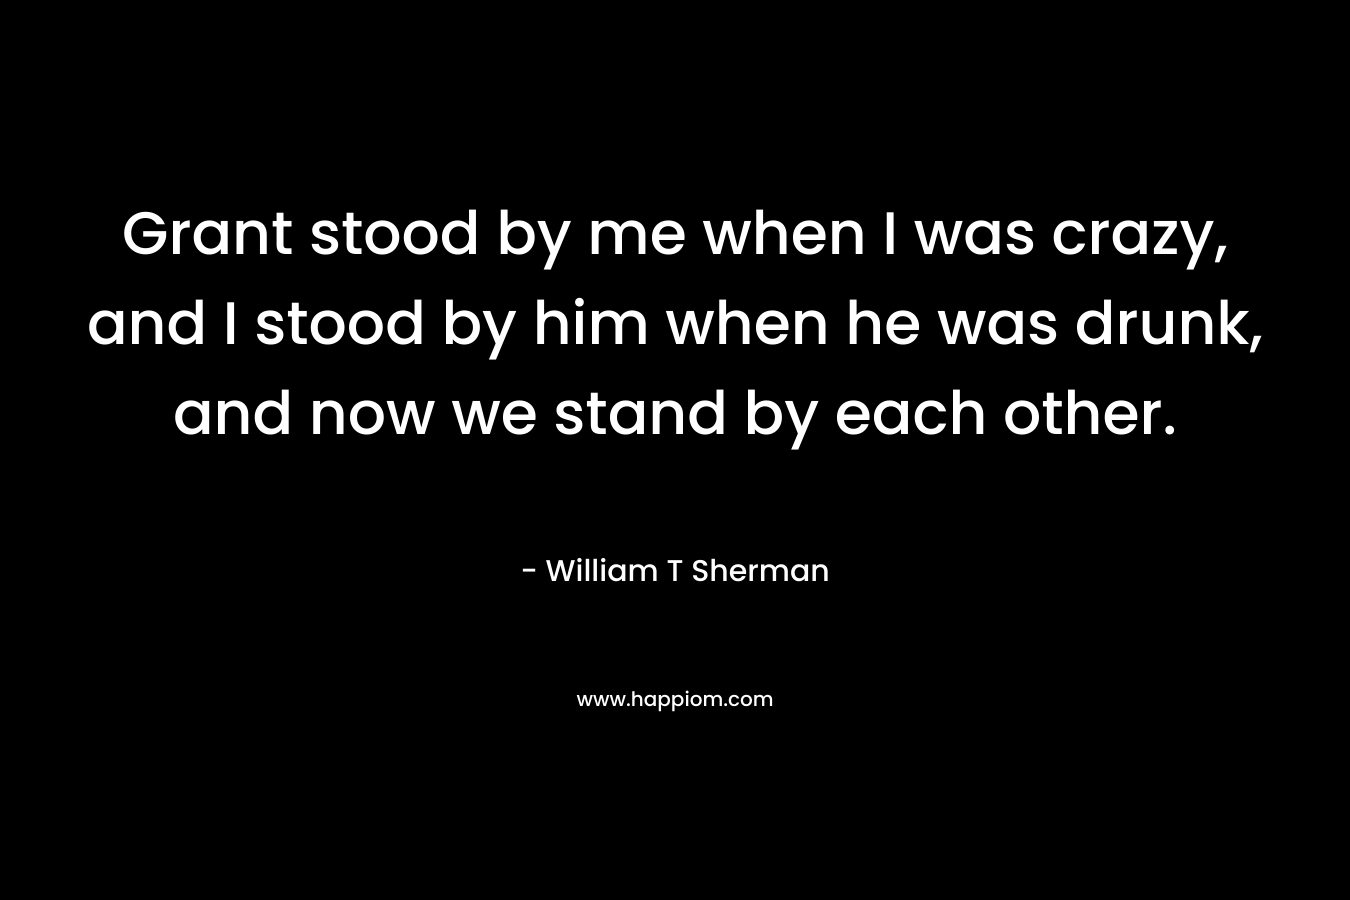 Grant stood by me when I was crazy, and I stood by him when he was drunk, and now we stand by each other. – William T Sherman